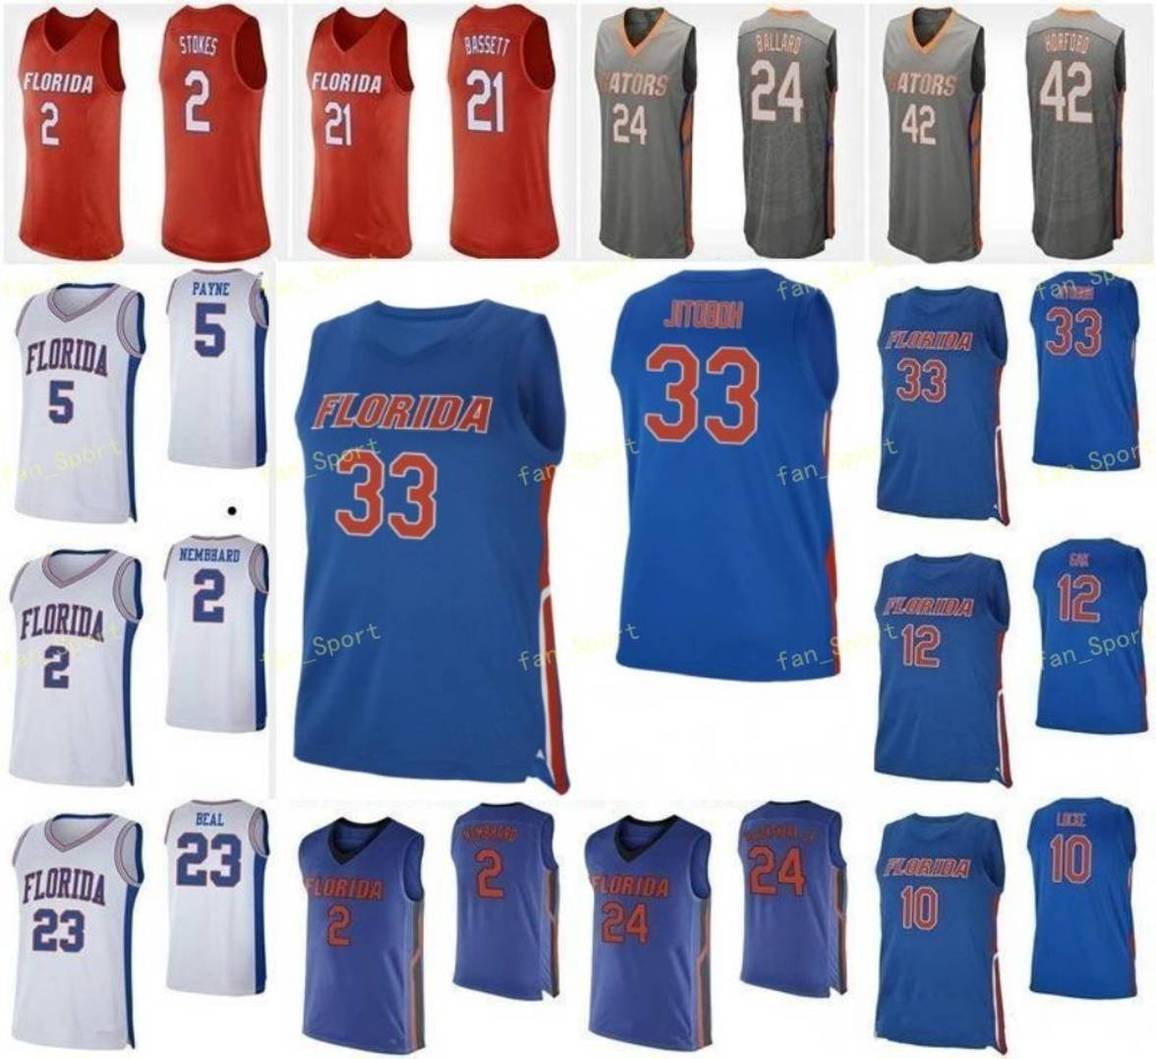 

NCAA College Florida Gators Basketball Jersey 25 Chandler Parsons 41 Neal Walk 50 Udonis Haslem 10 Dorian Finney-Smith Custom Stitched, As